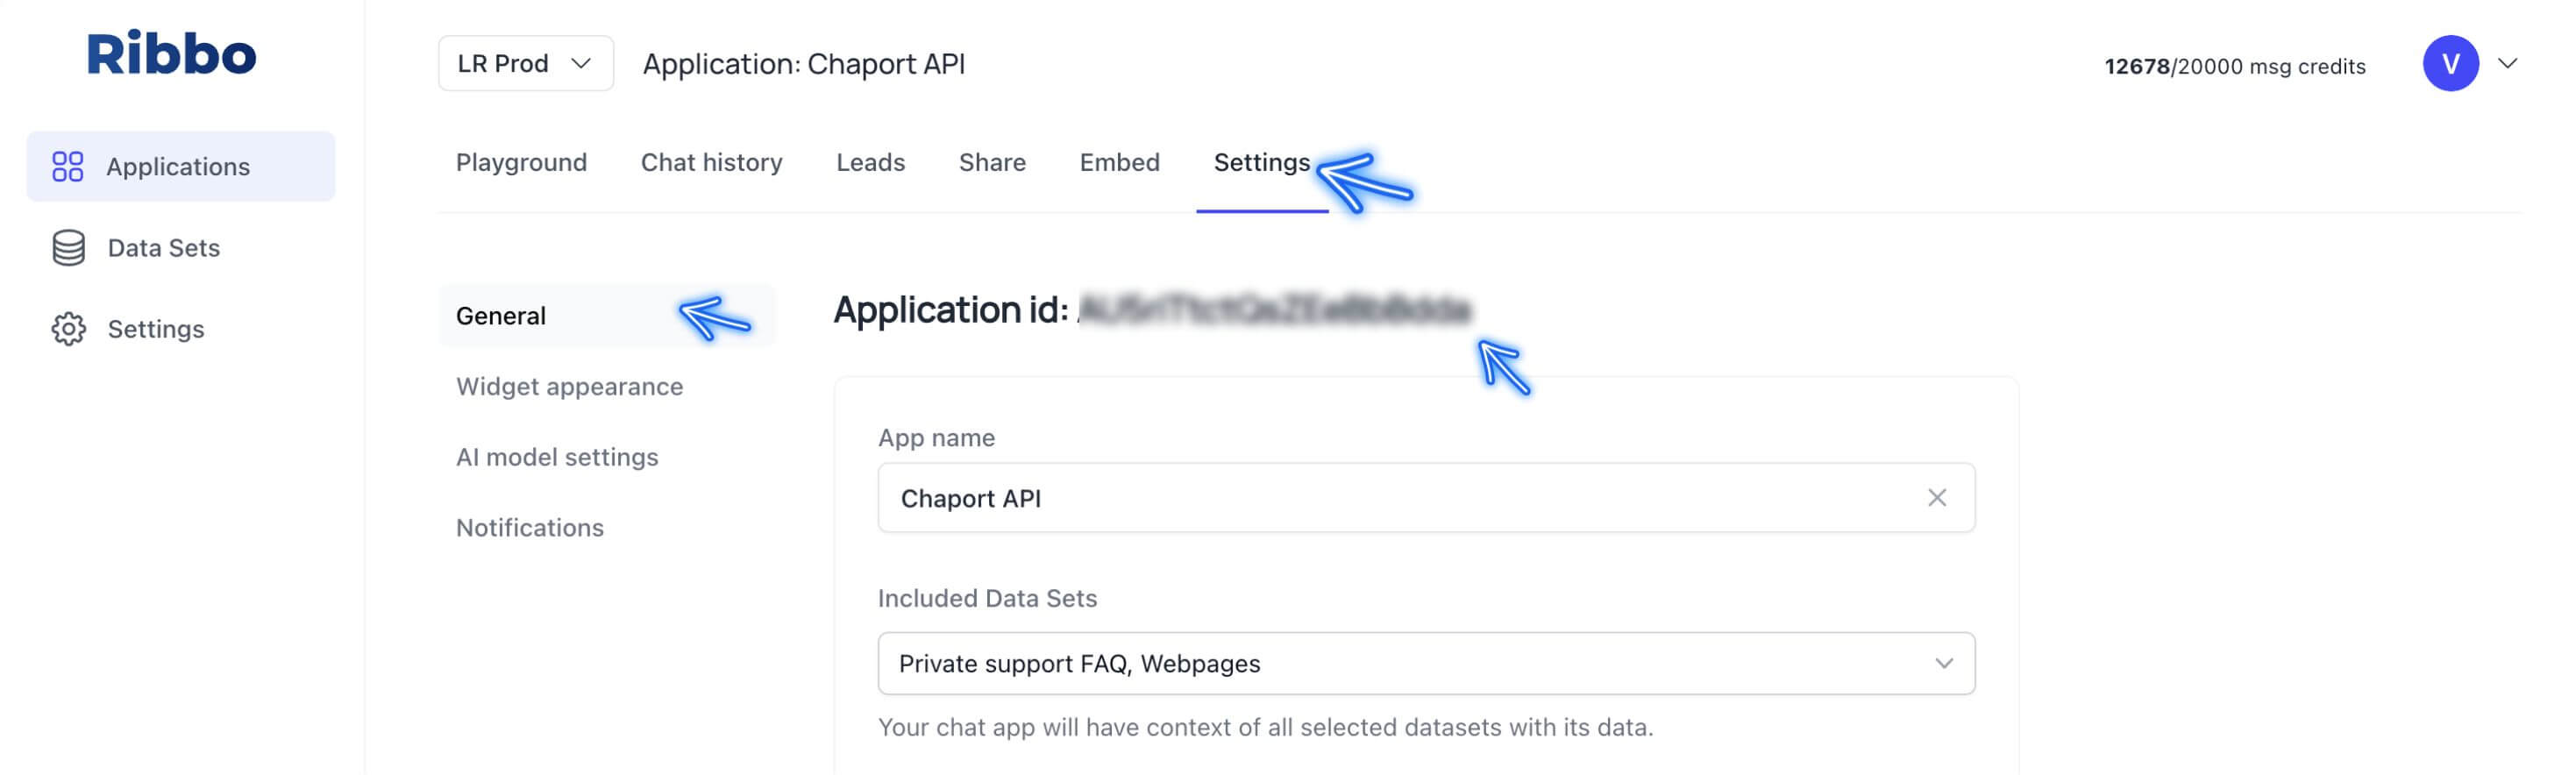 How to connect an AI Chatbot to Facebook Messenger?